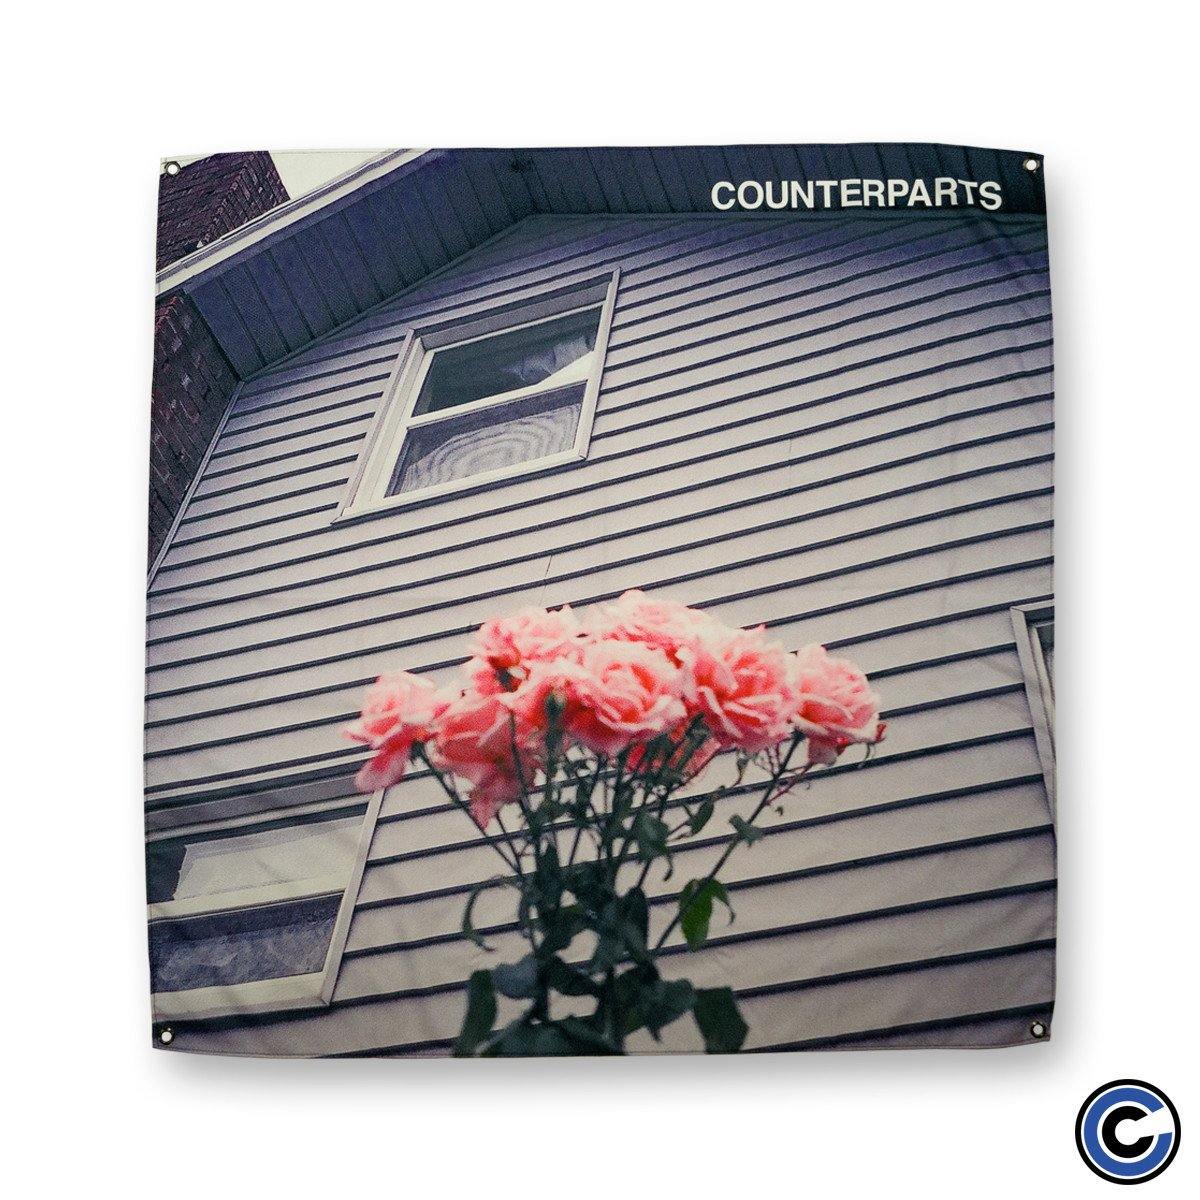 Buy – Counterparts "House" Flag – Band & Music Merch – Cold Cuts Merch